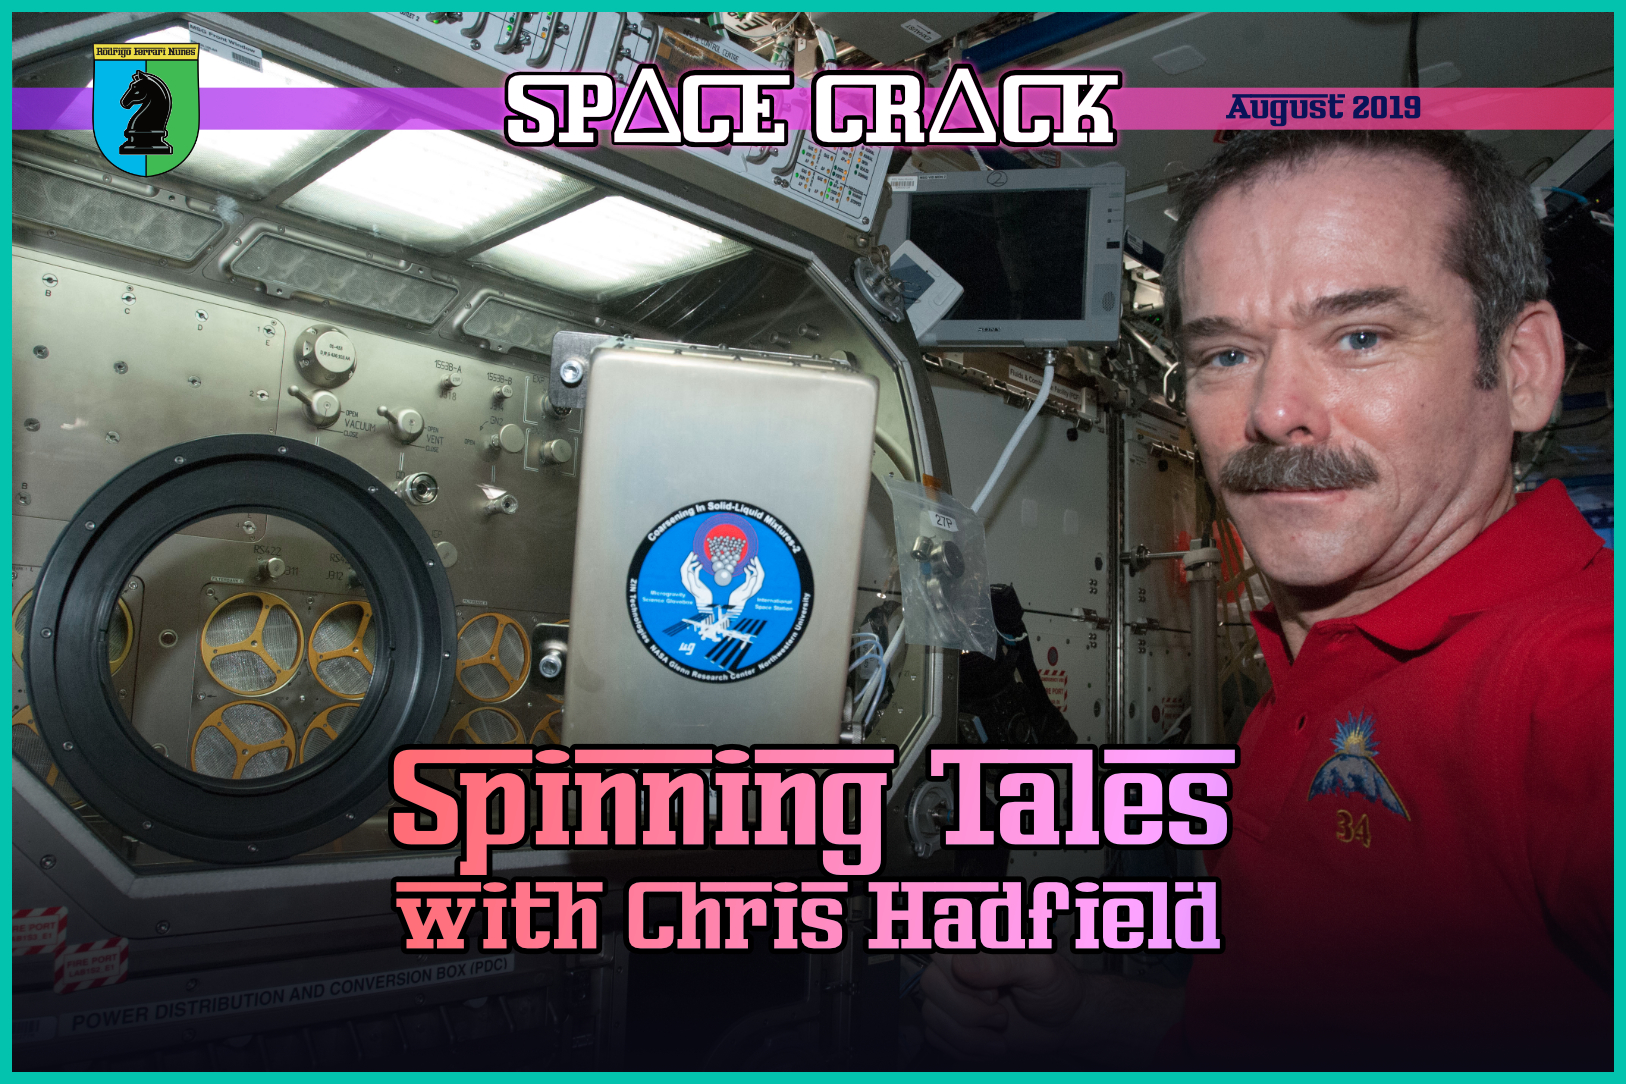 Spinning Tales with Chris Hadfield